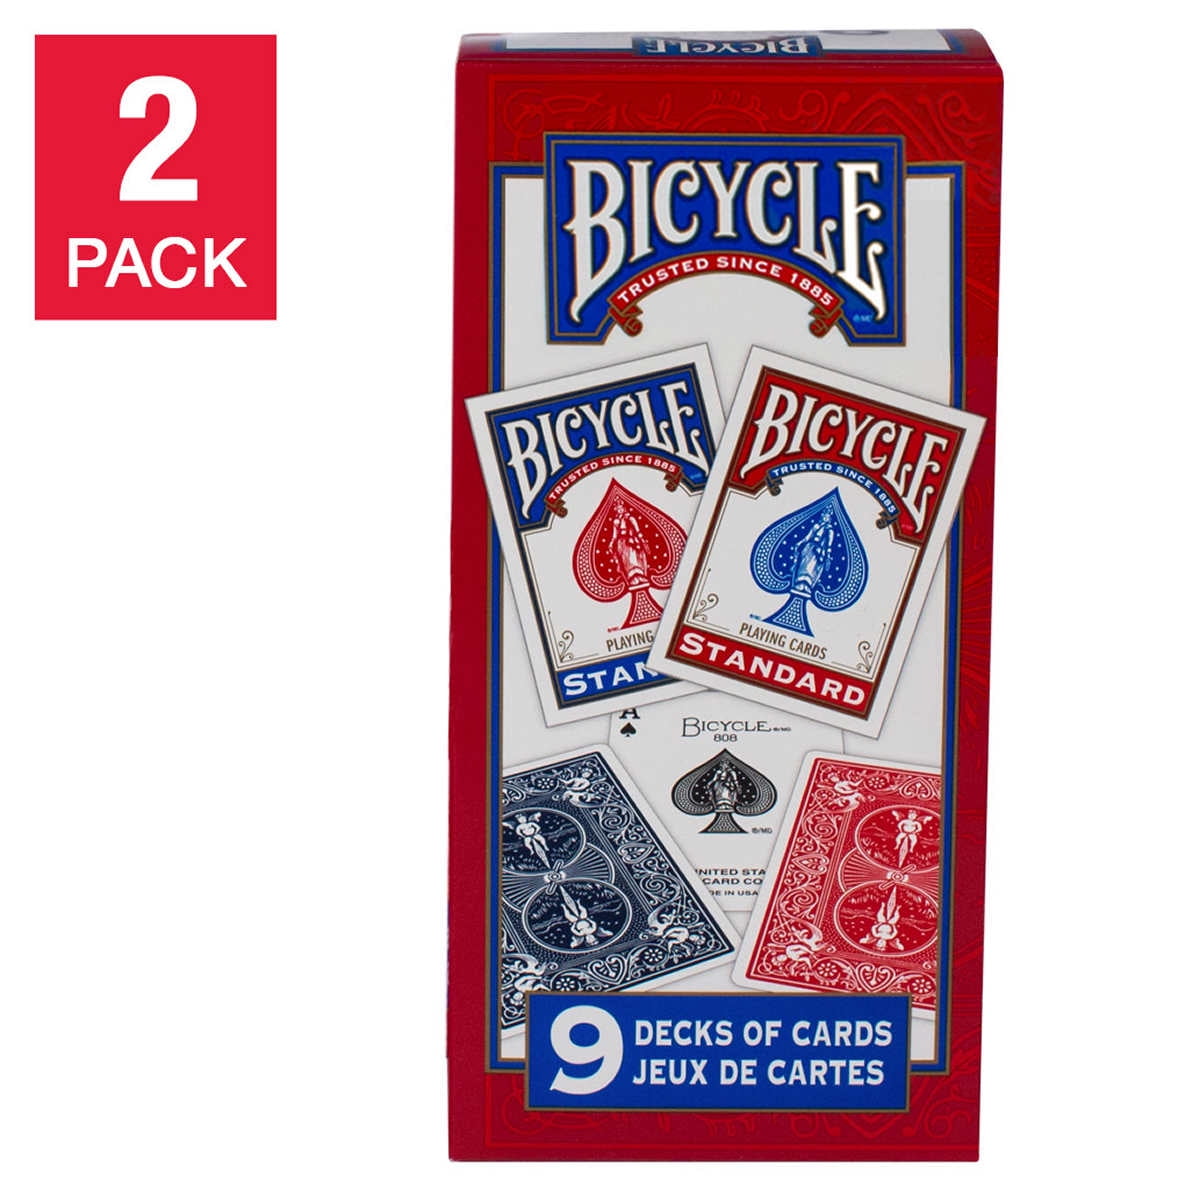 Bicycle Premium Poker Size Standard Index Playing Cards 